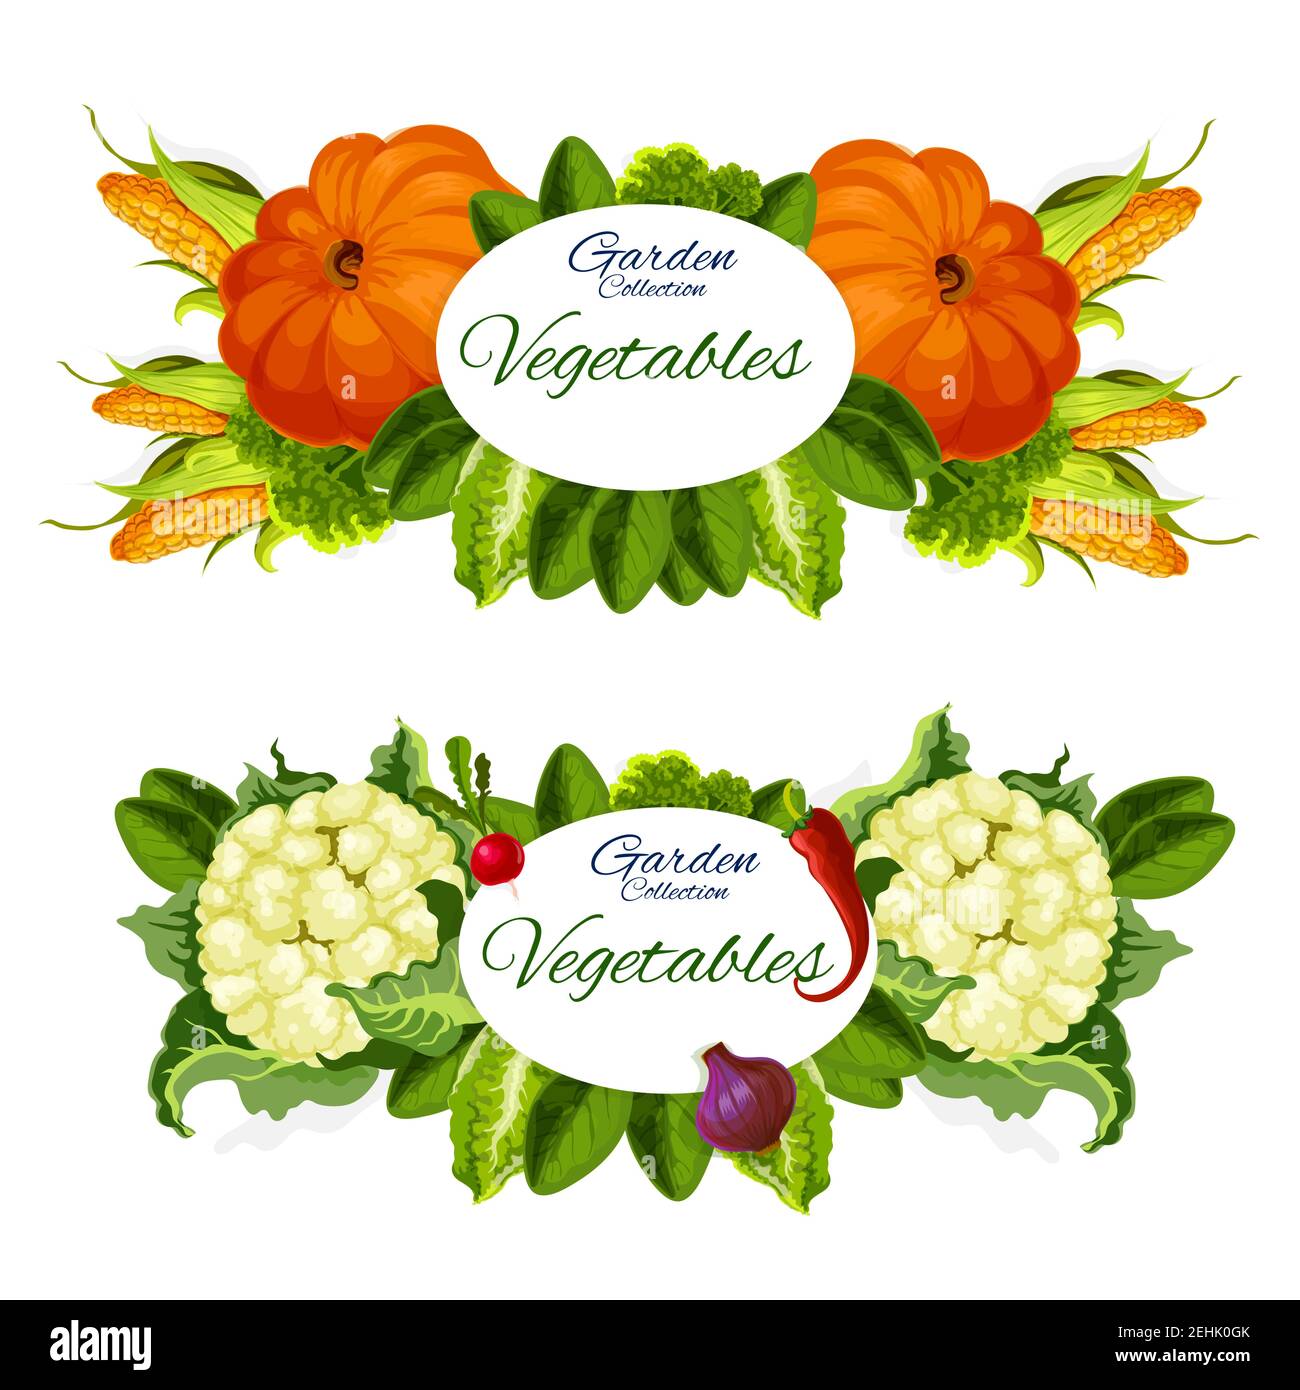 Garden vegetables, pumpkins, sweet corn and cauliflower, radish and red pepper, green lettuce leaves, onion and lettuce. Natural veggies grocery veget Stock Vector